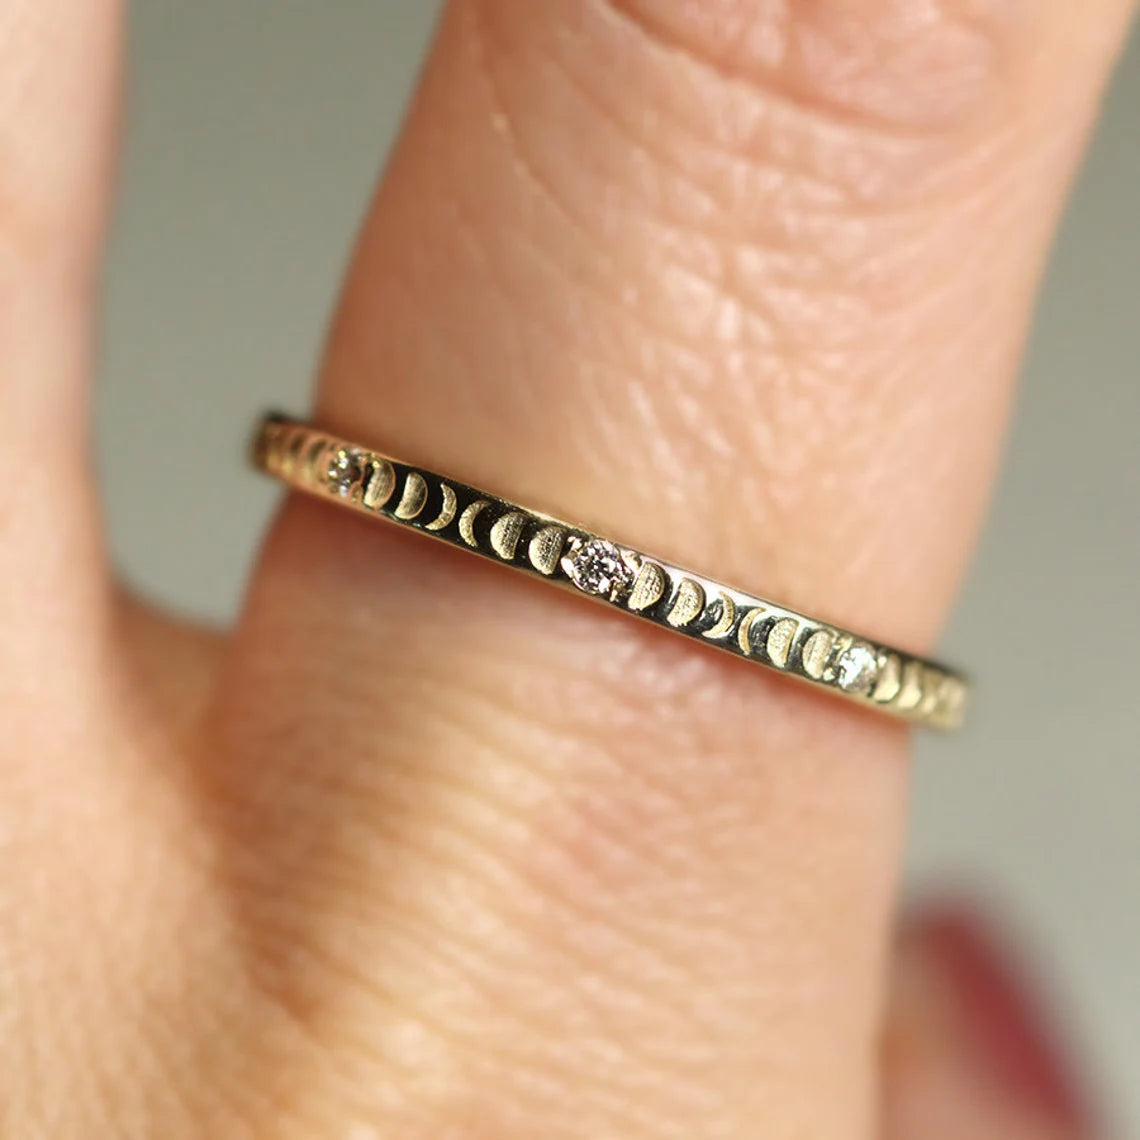 Moon Engraving with Natural Diamond Ring in 14k Gold